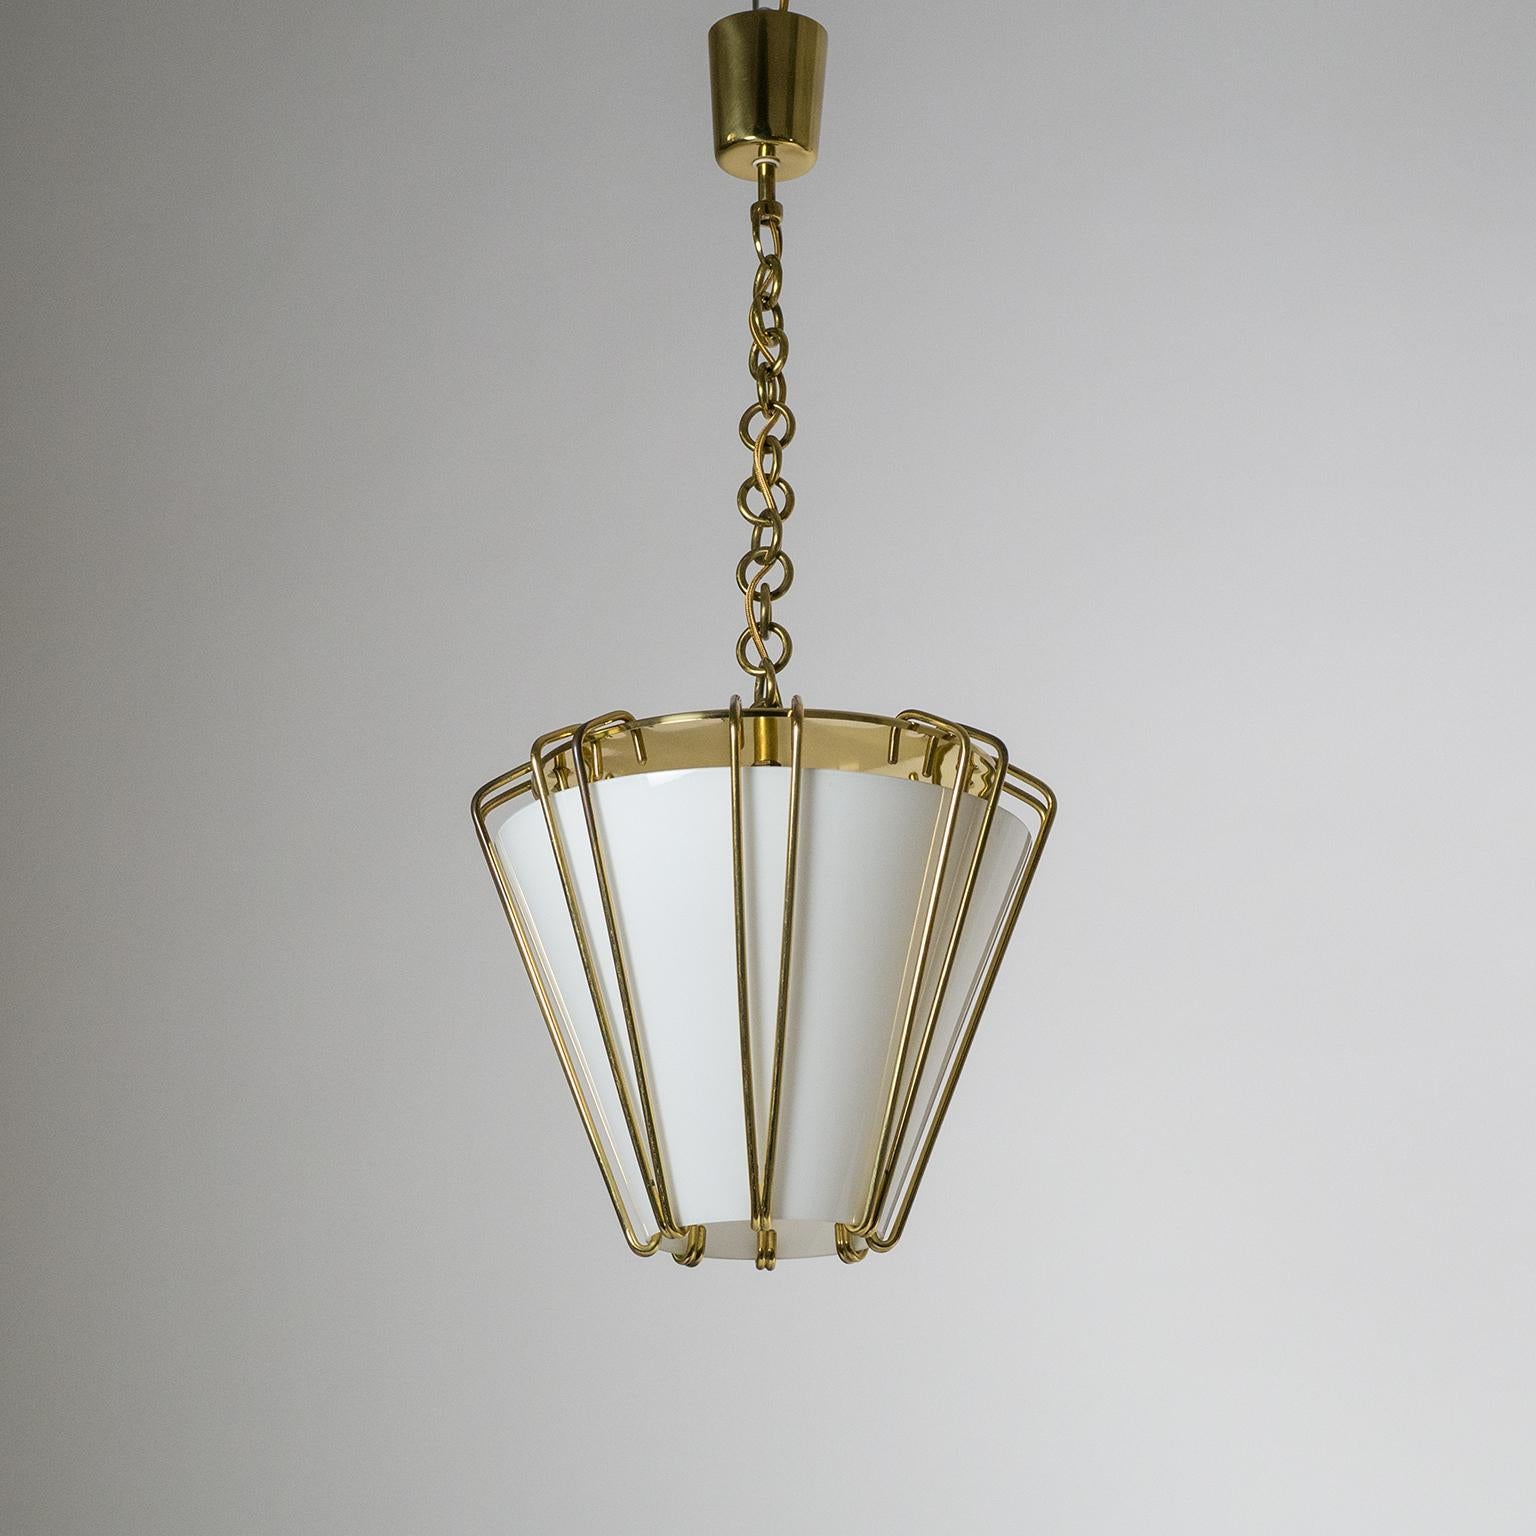 Brilliant and rare J.T. Kalmar lantern or pendant from the 1940s in brass and glass. The large conical glass diffuser (with white inner casing) is suspended by an ingenious design of brass wires. Extremely good original condition with some light